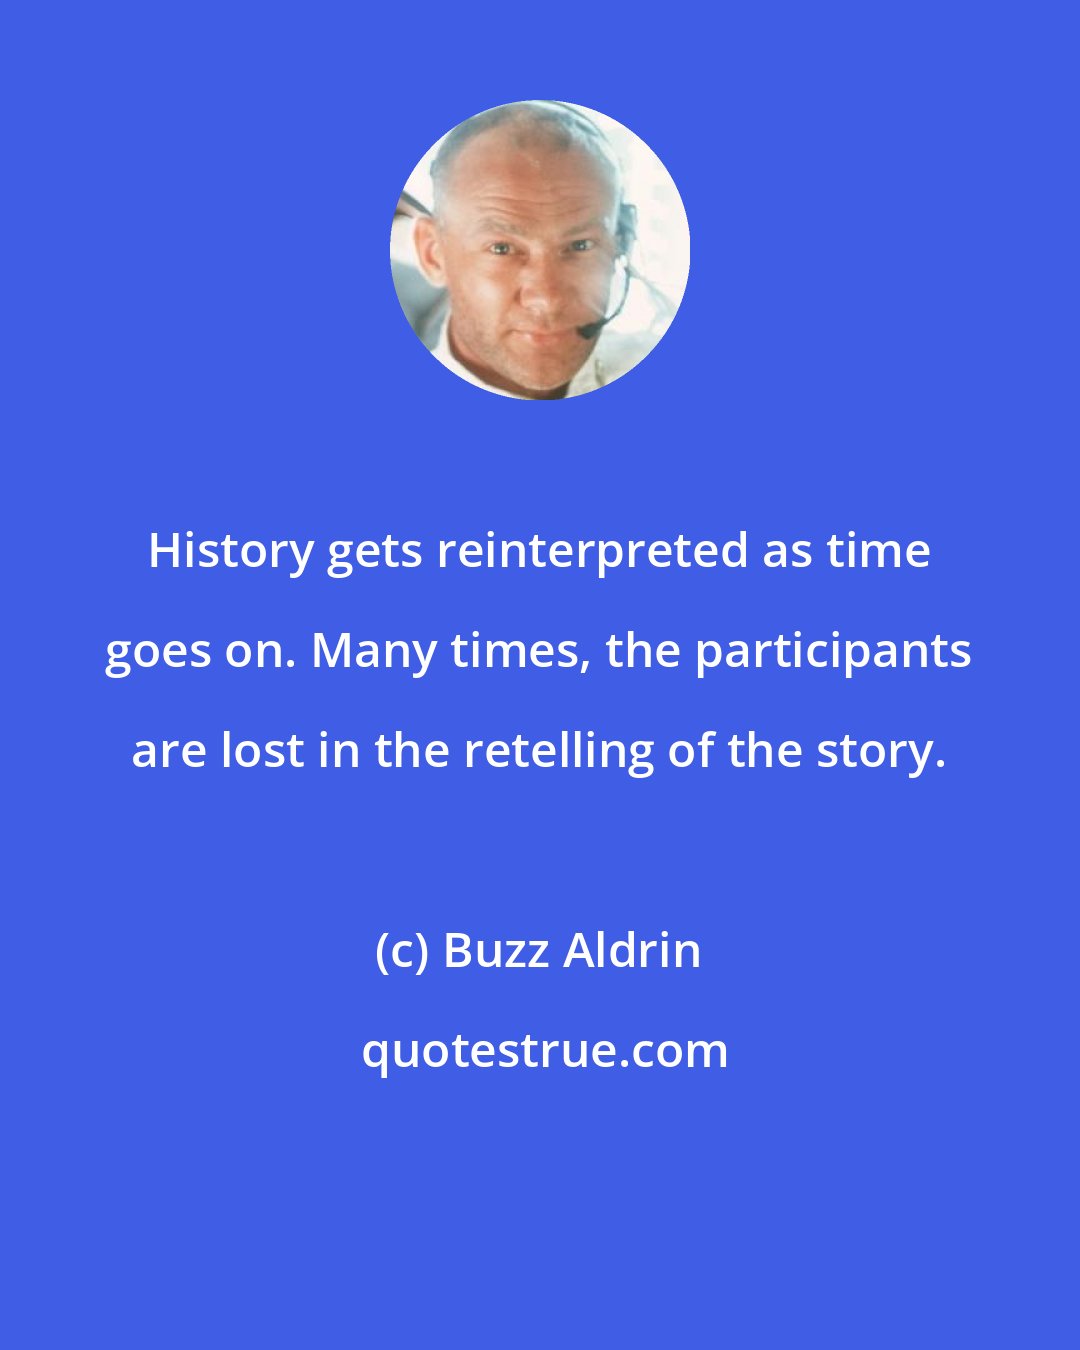 Buzz Aldrin: History gets reinterpreted as time goes on. Many times, the participants are lost in the retelling of the story.